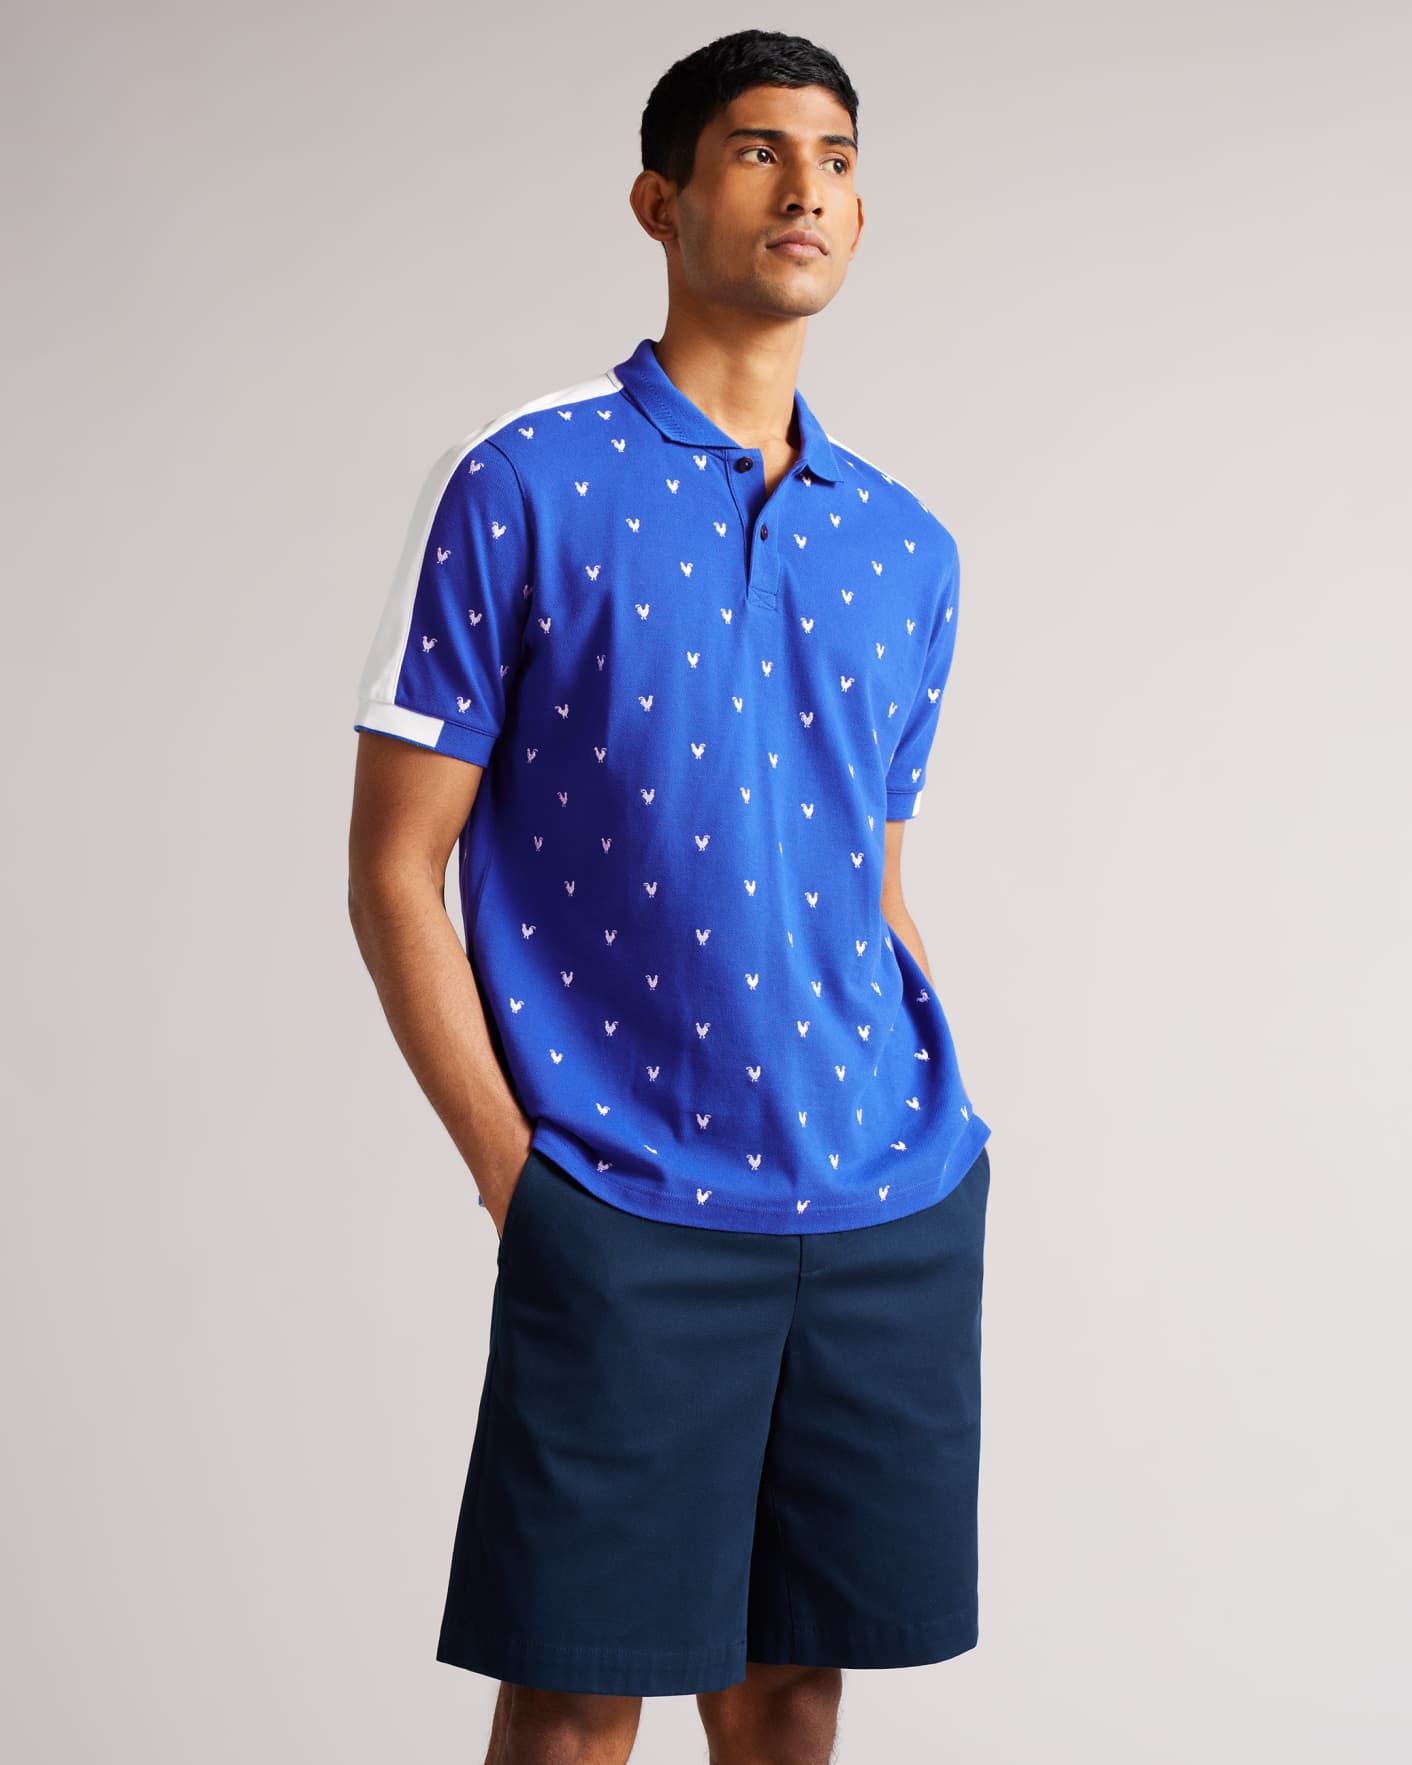 Bright Blue Short Sleeve Embroidered Polo Shirt Ted Baker